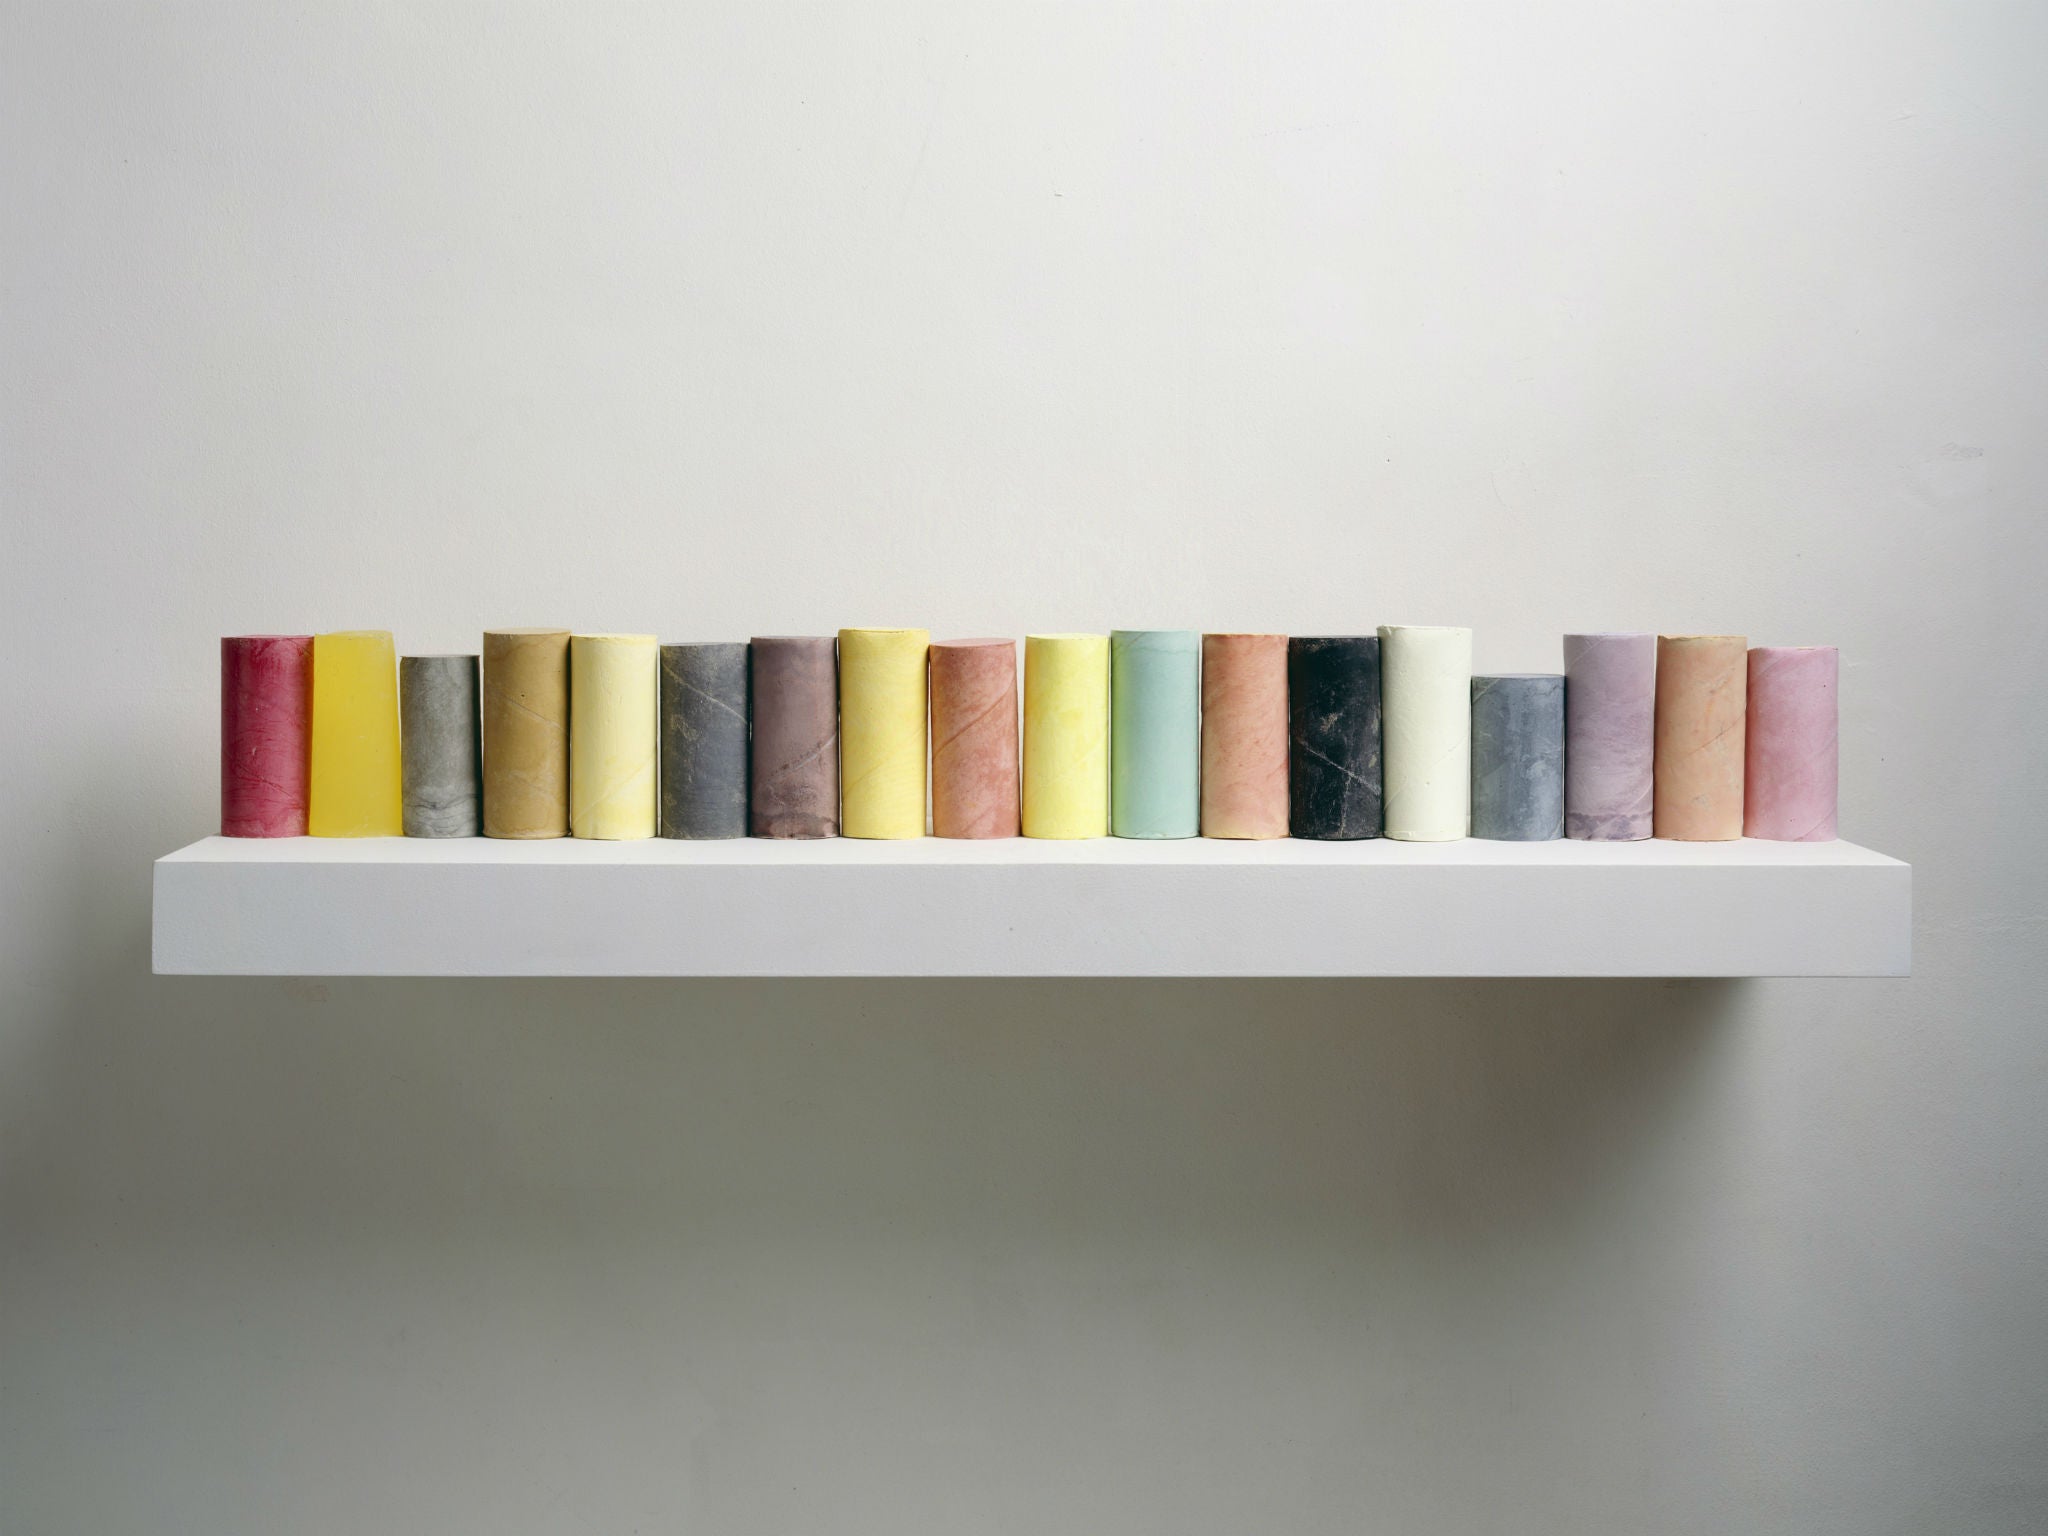 ‘Line Up’, 2007-8. Plaster, pigment, resin, wood and metal (18 units, one shelf) (? Rachel Whiteread Photo: courtesy the artist and Mike Bruce)